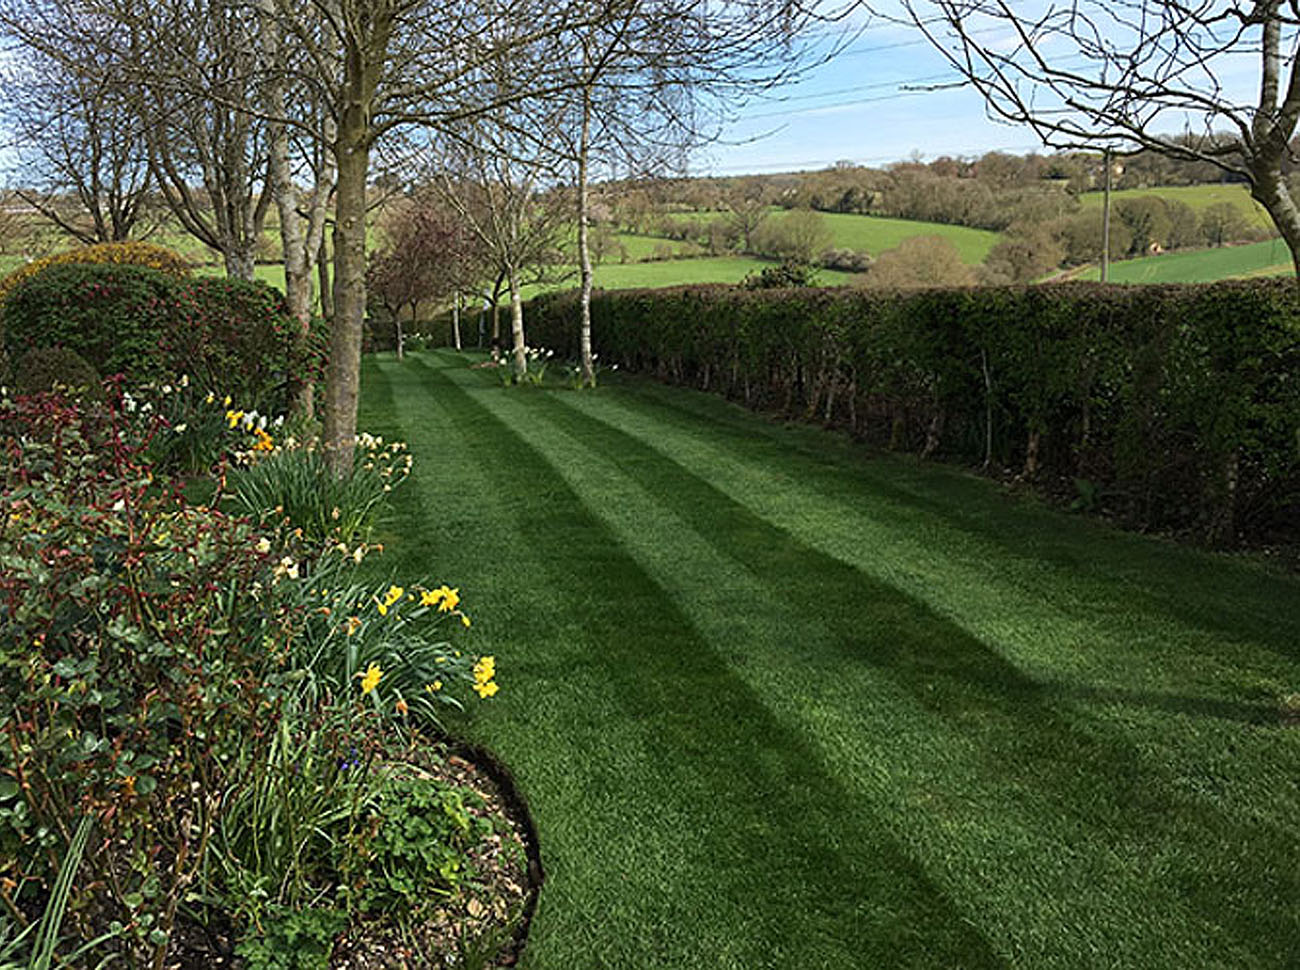 Grass cutting and lawn mowing services for residential and commercial properties in buckinghamshire, bedfordshire and hertfordshire including pest control, hedge cutting, tree maintenance and wild flower planting